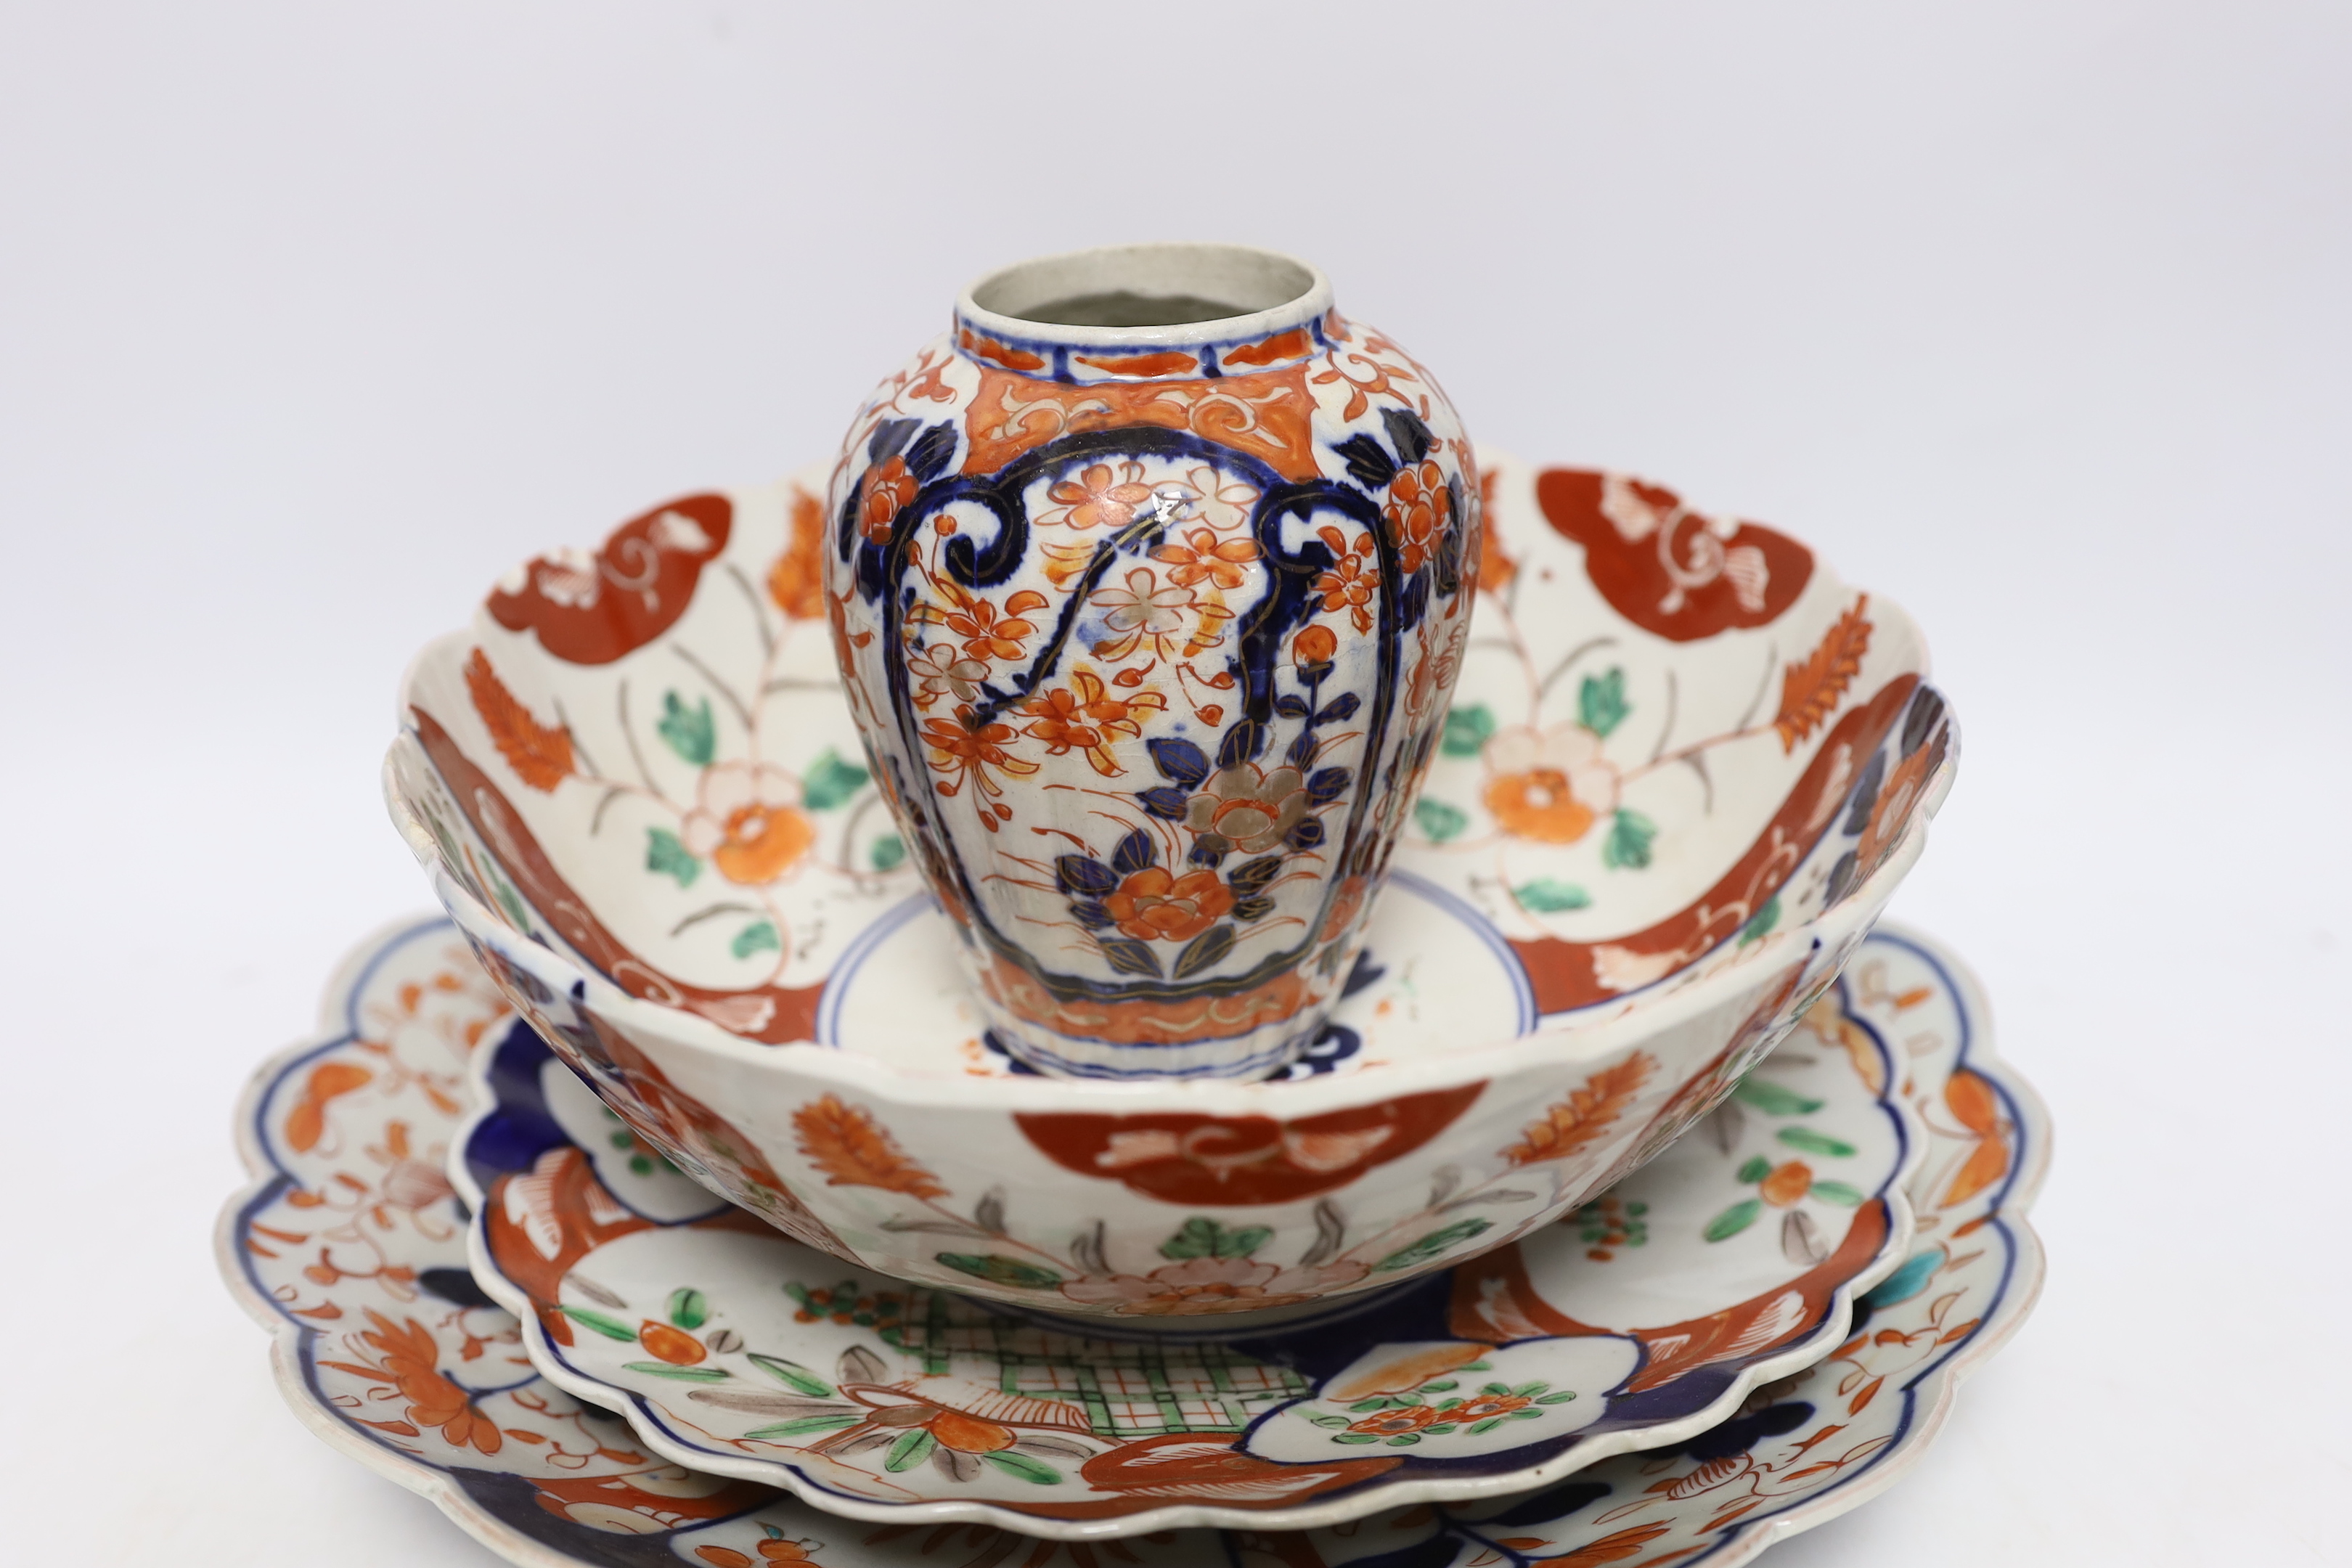 A group of Japanese Imari plates, dishes, a bowl and a vase